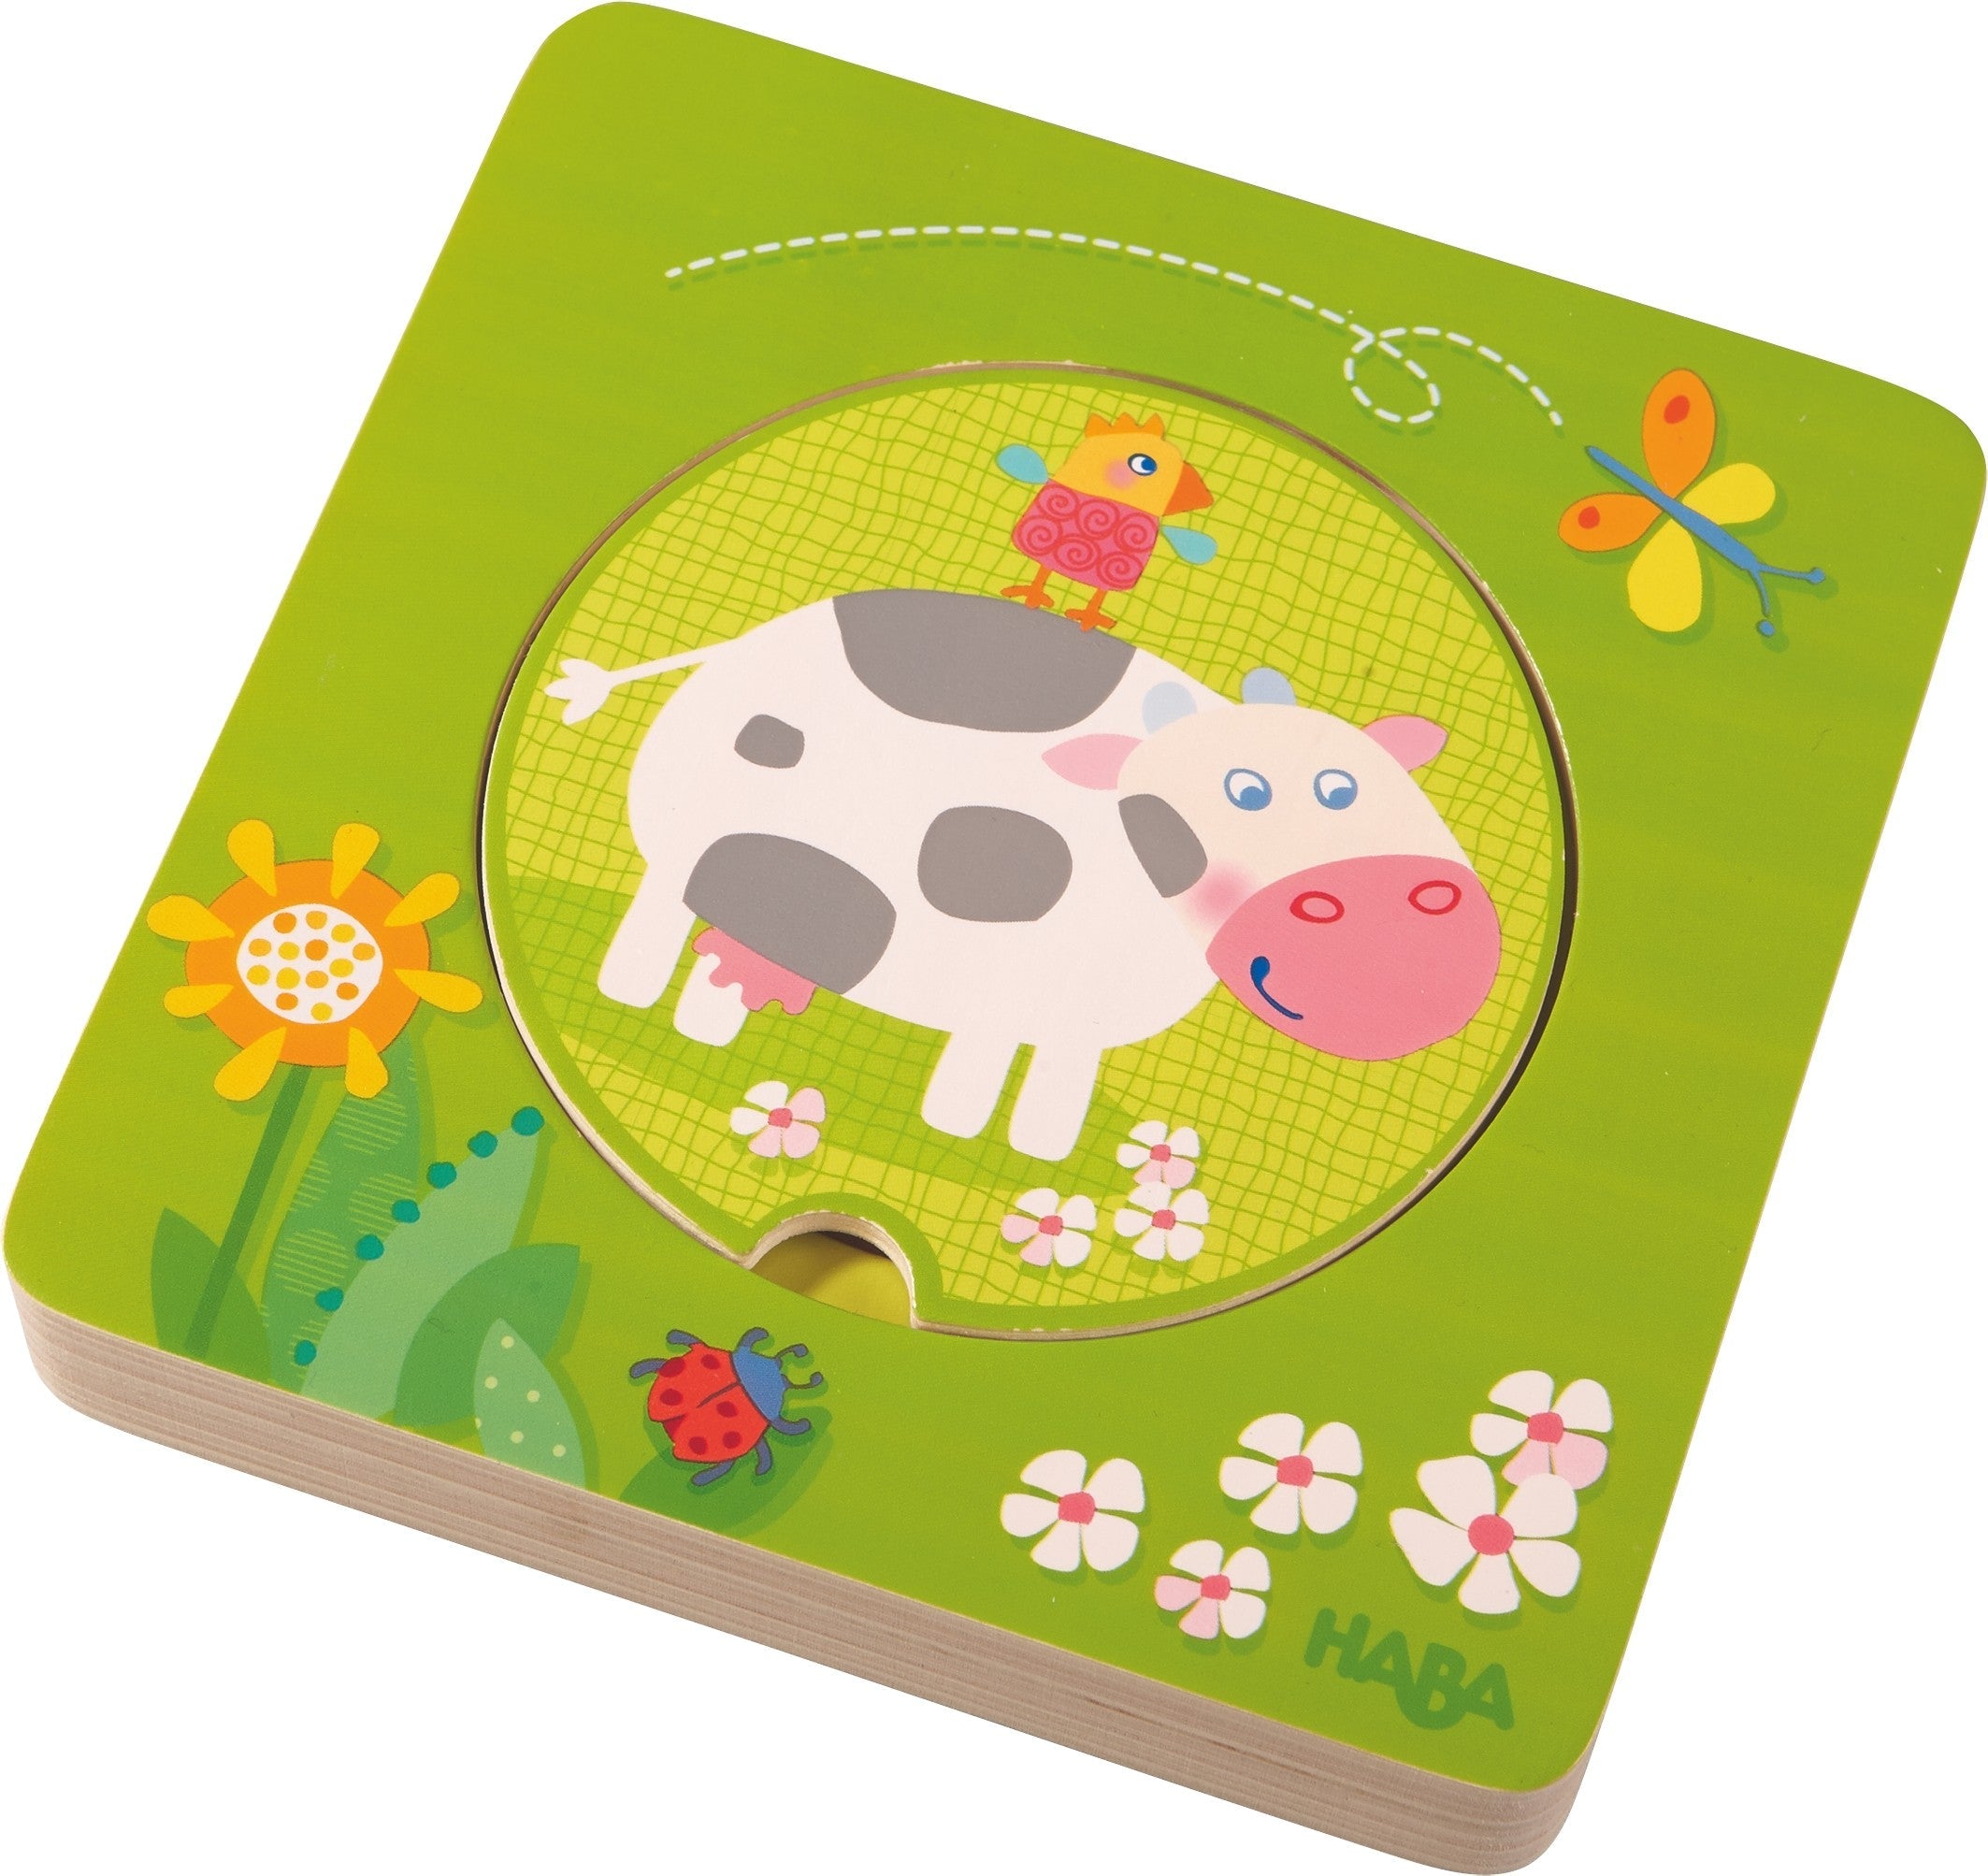 Haba On the Farm Wooden Puzzle